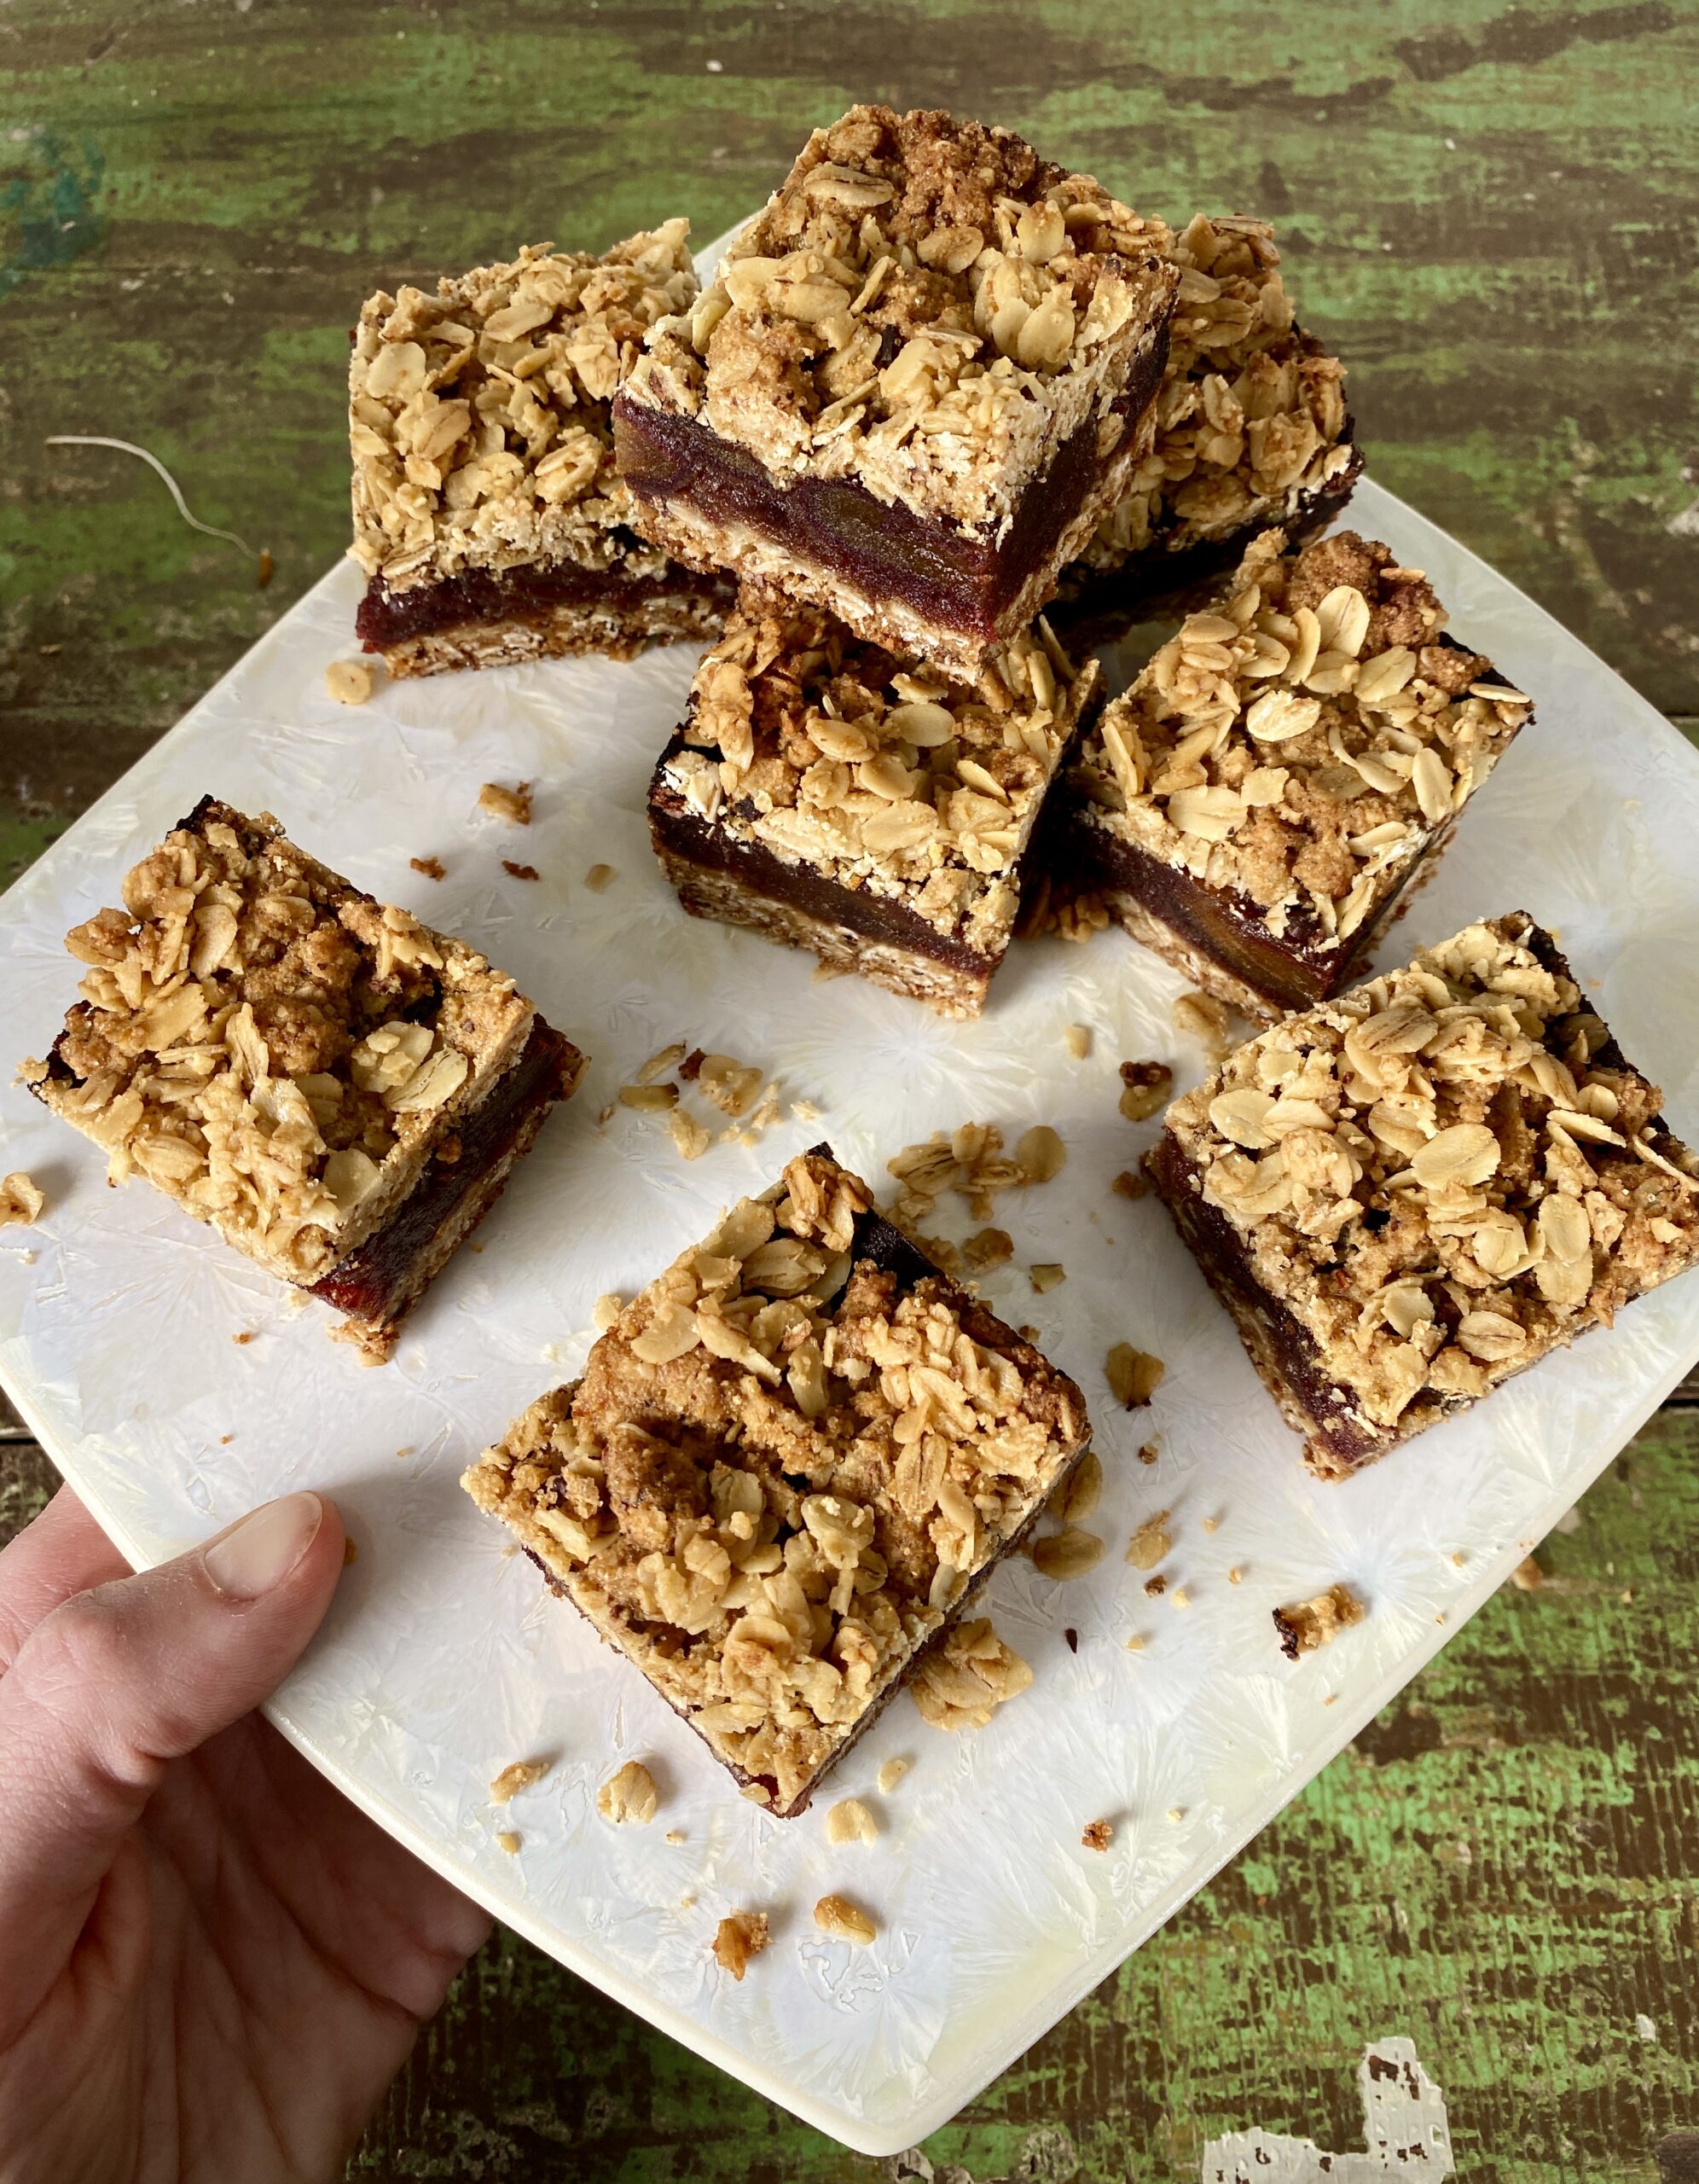 Cranberry Cocoa Date Squares by Christine Tizzard